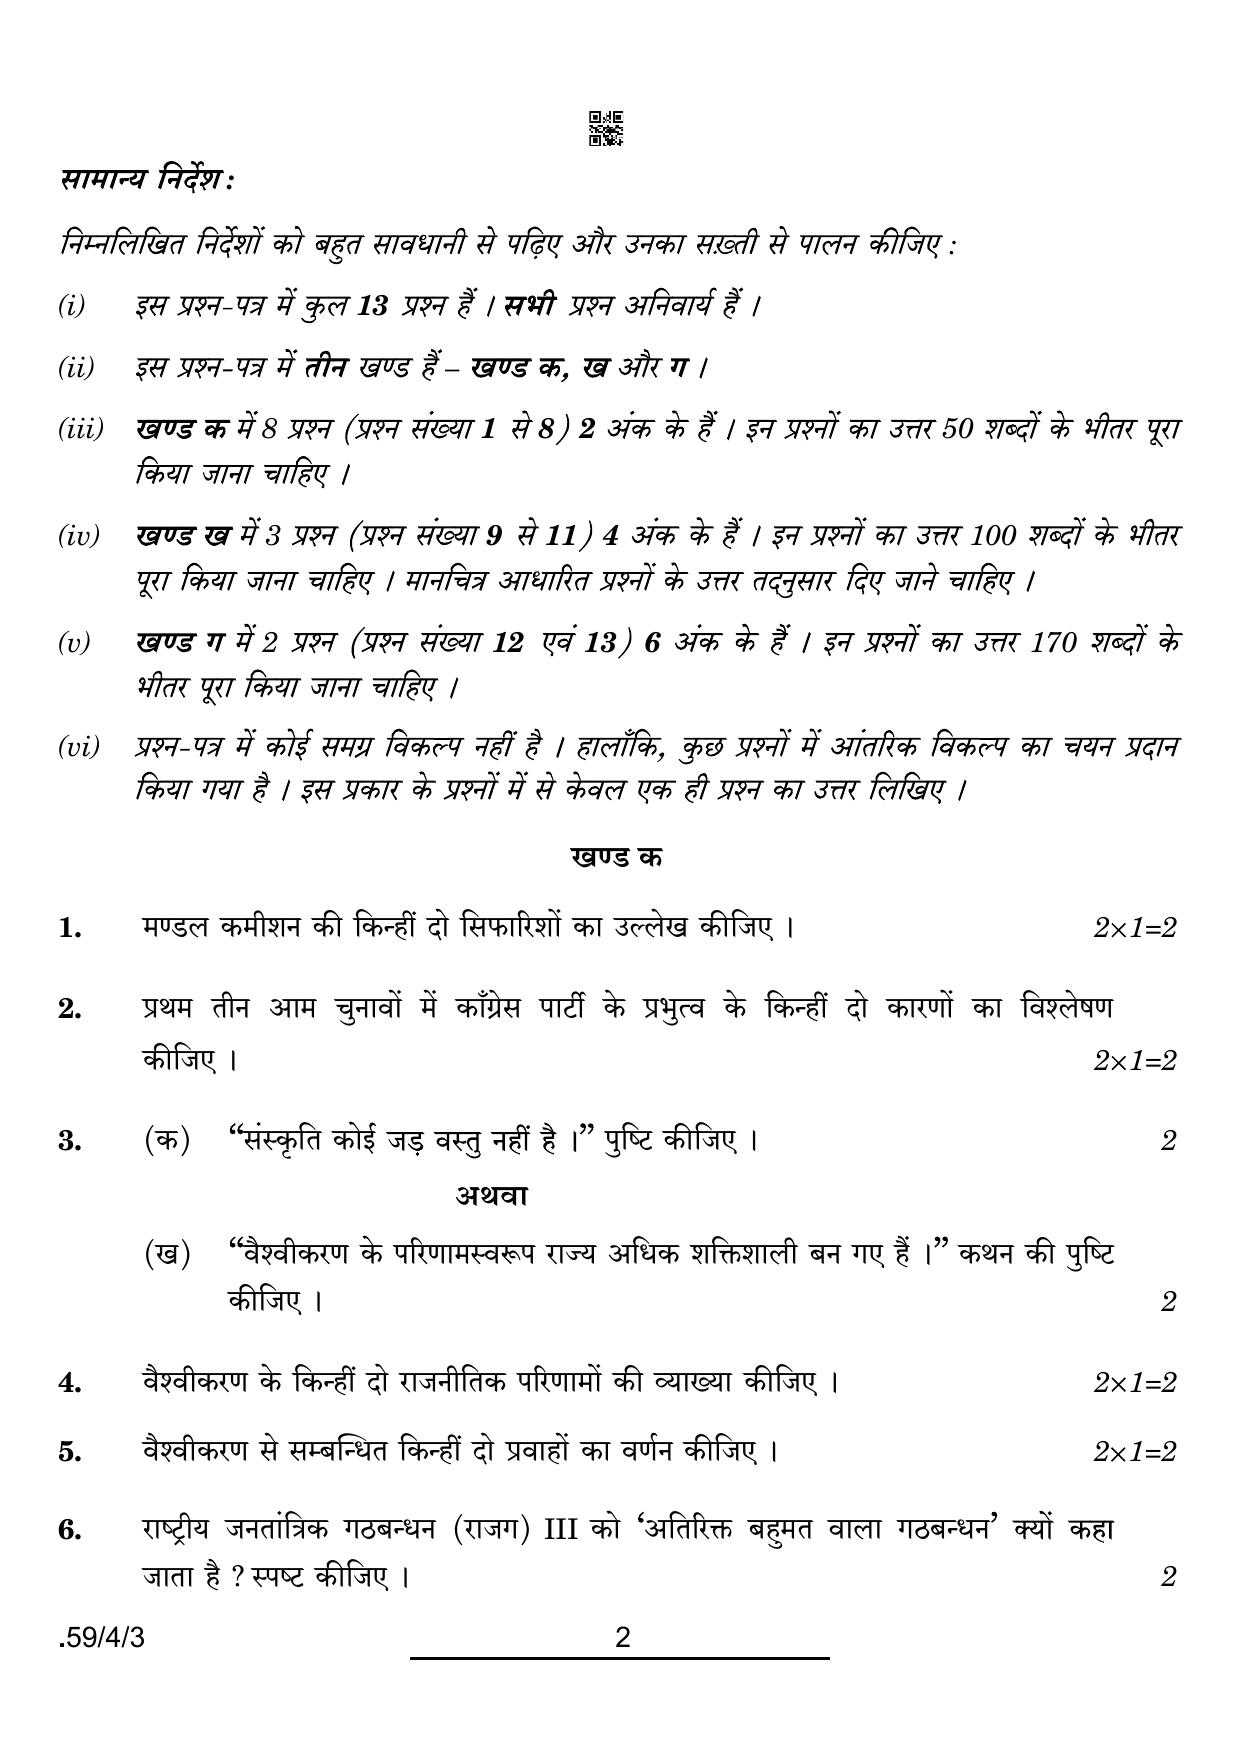 CBSE Class 12 59-4-3 Political Science 2022 Question Paper - Page 2